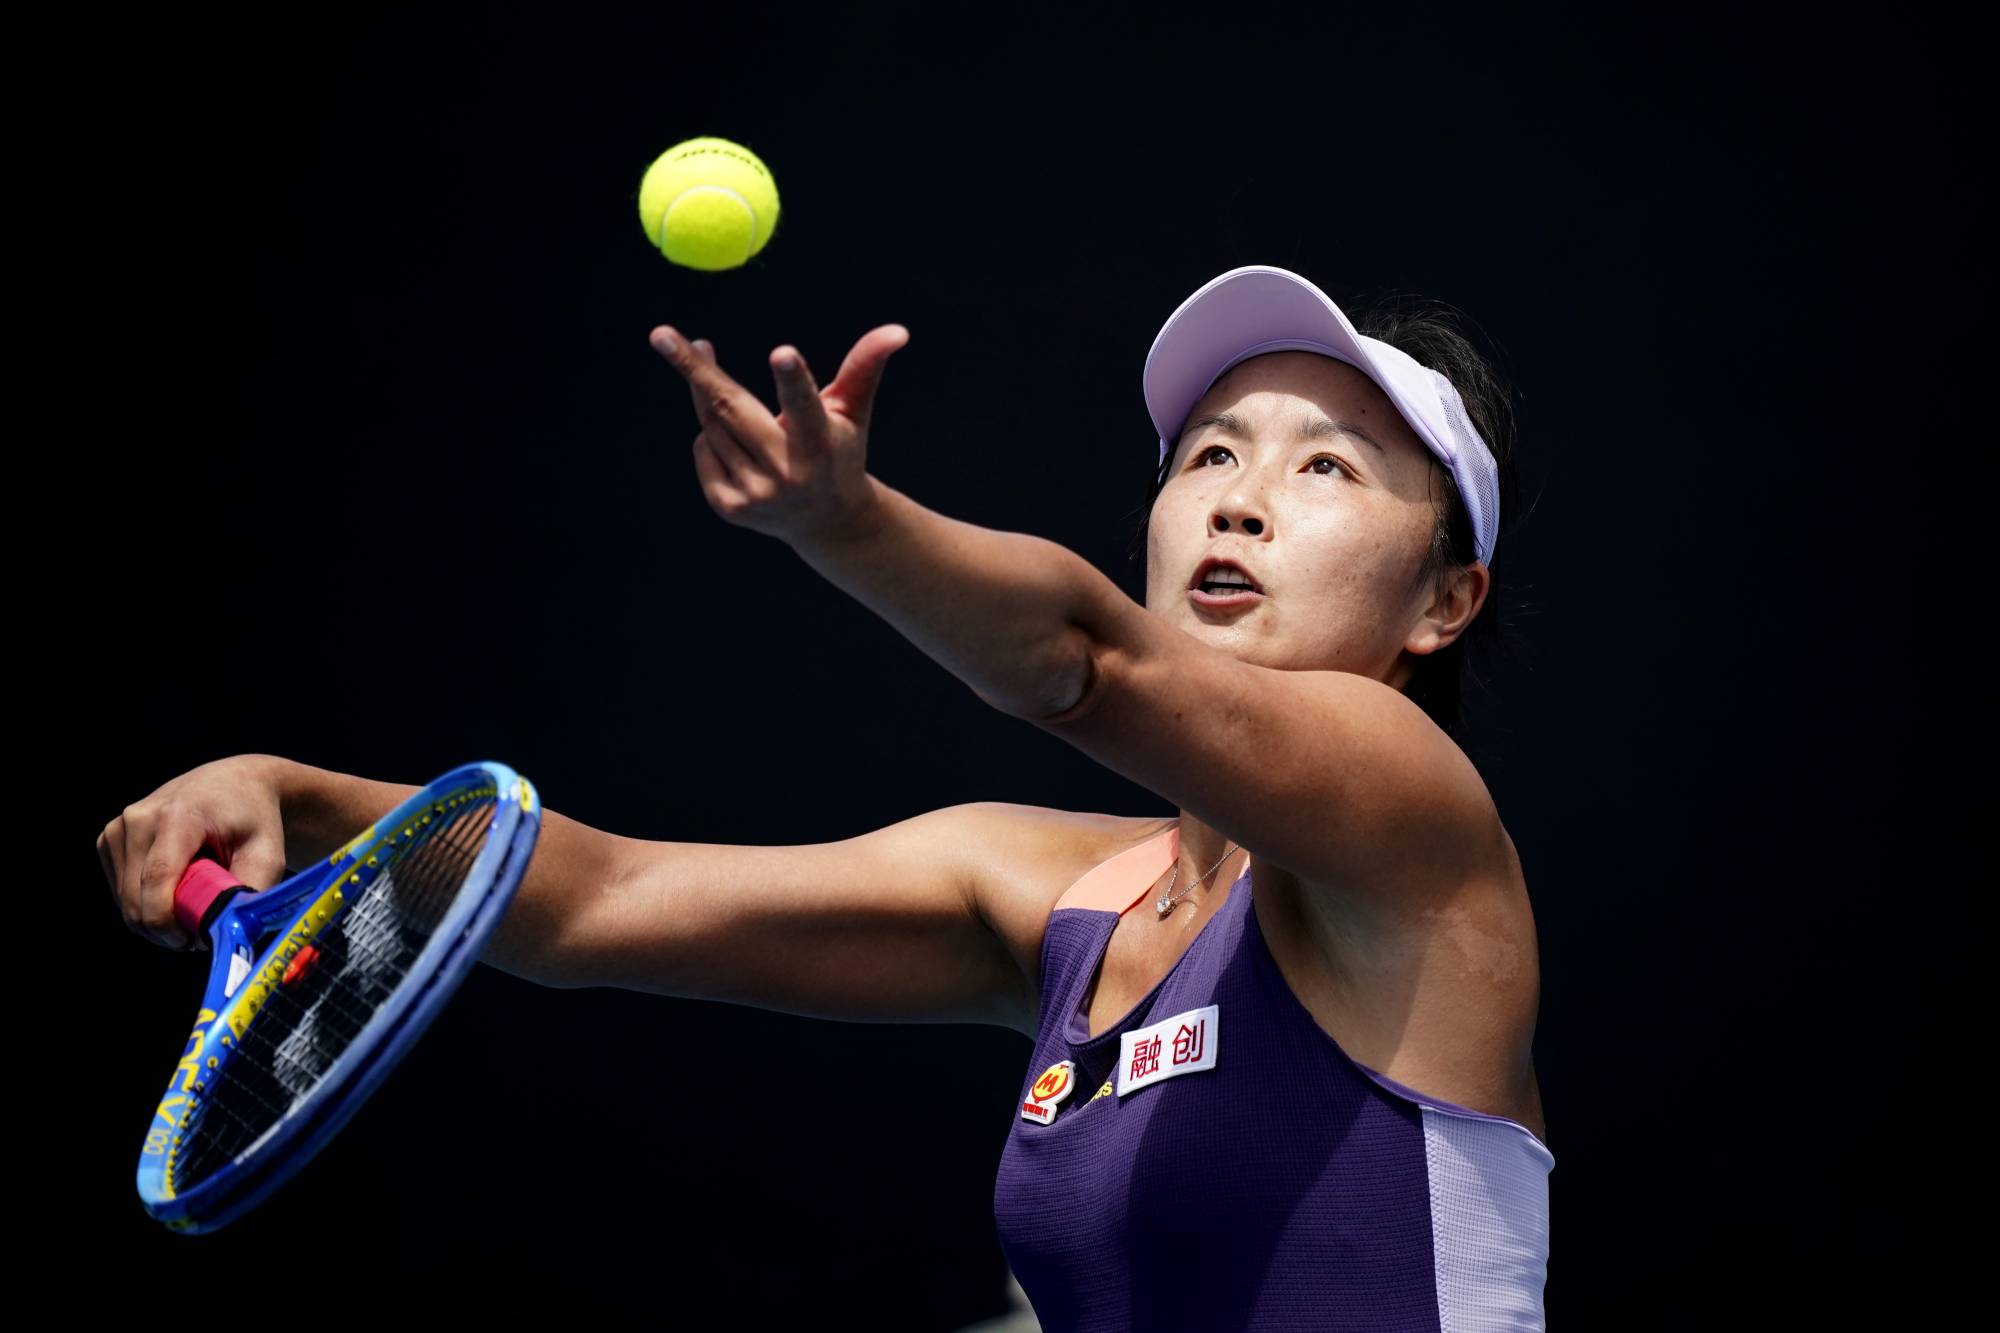 Wta Demands 'Private' Meeting With Peng Shuai Before Considering Return To China | The Japan Times